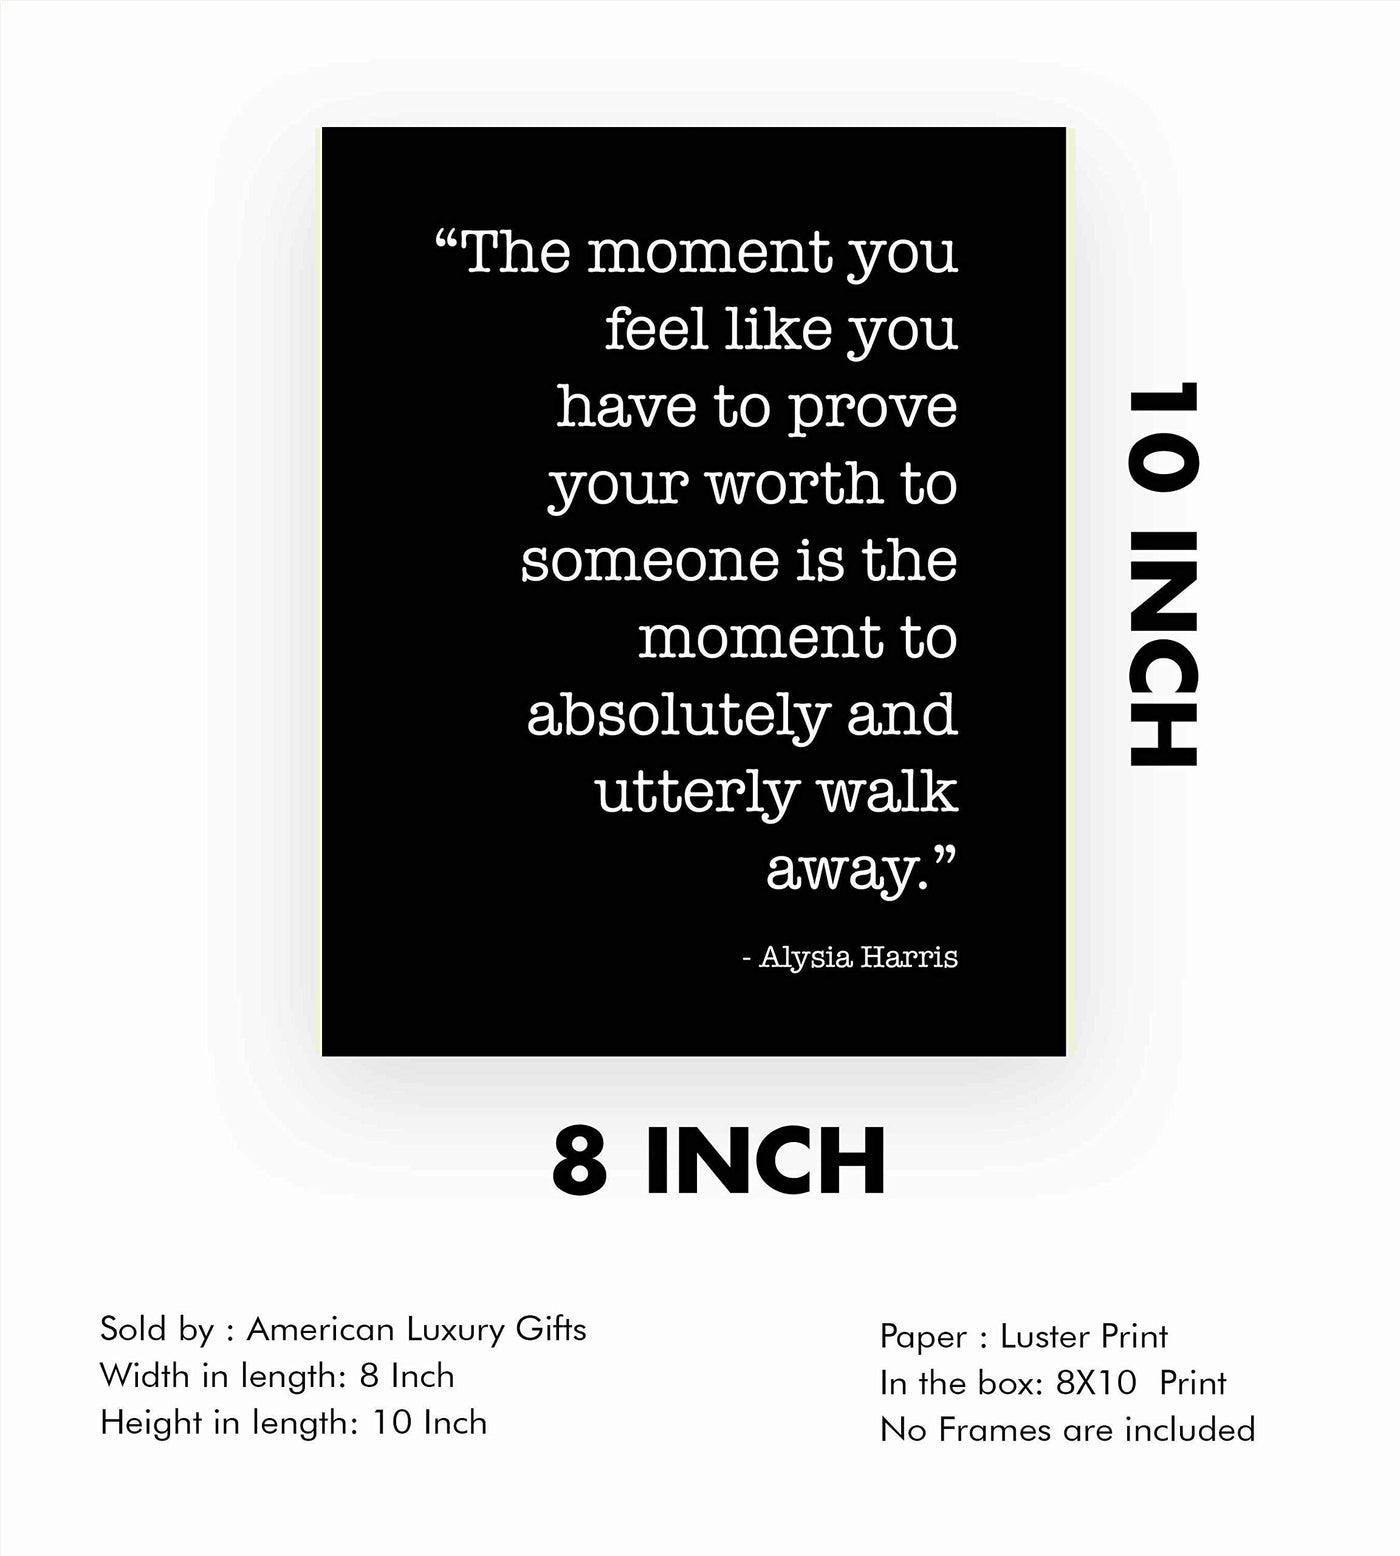 The Moment You Have to Prove Your Worth Inspirational Quotes Wall Print -8 x 10" Modern Wall Art-Ready to Frame. Motivational Home-Office-School Decor. Positive Message For Everyone!